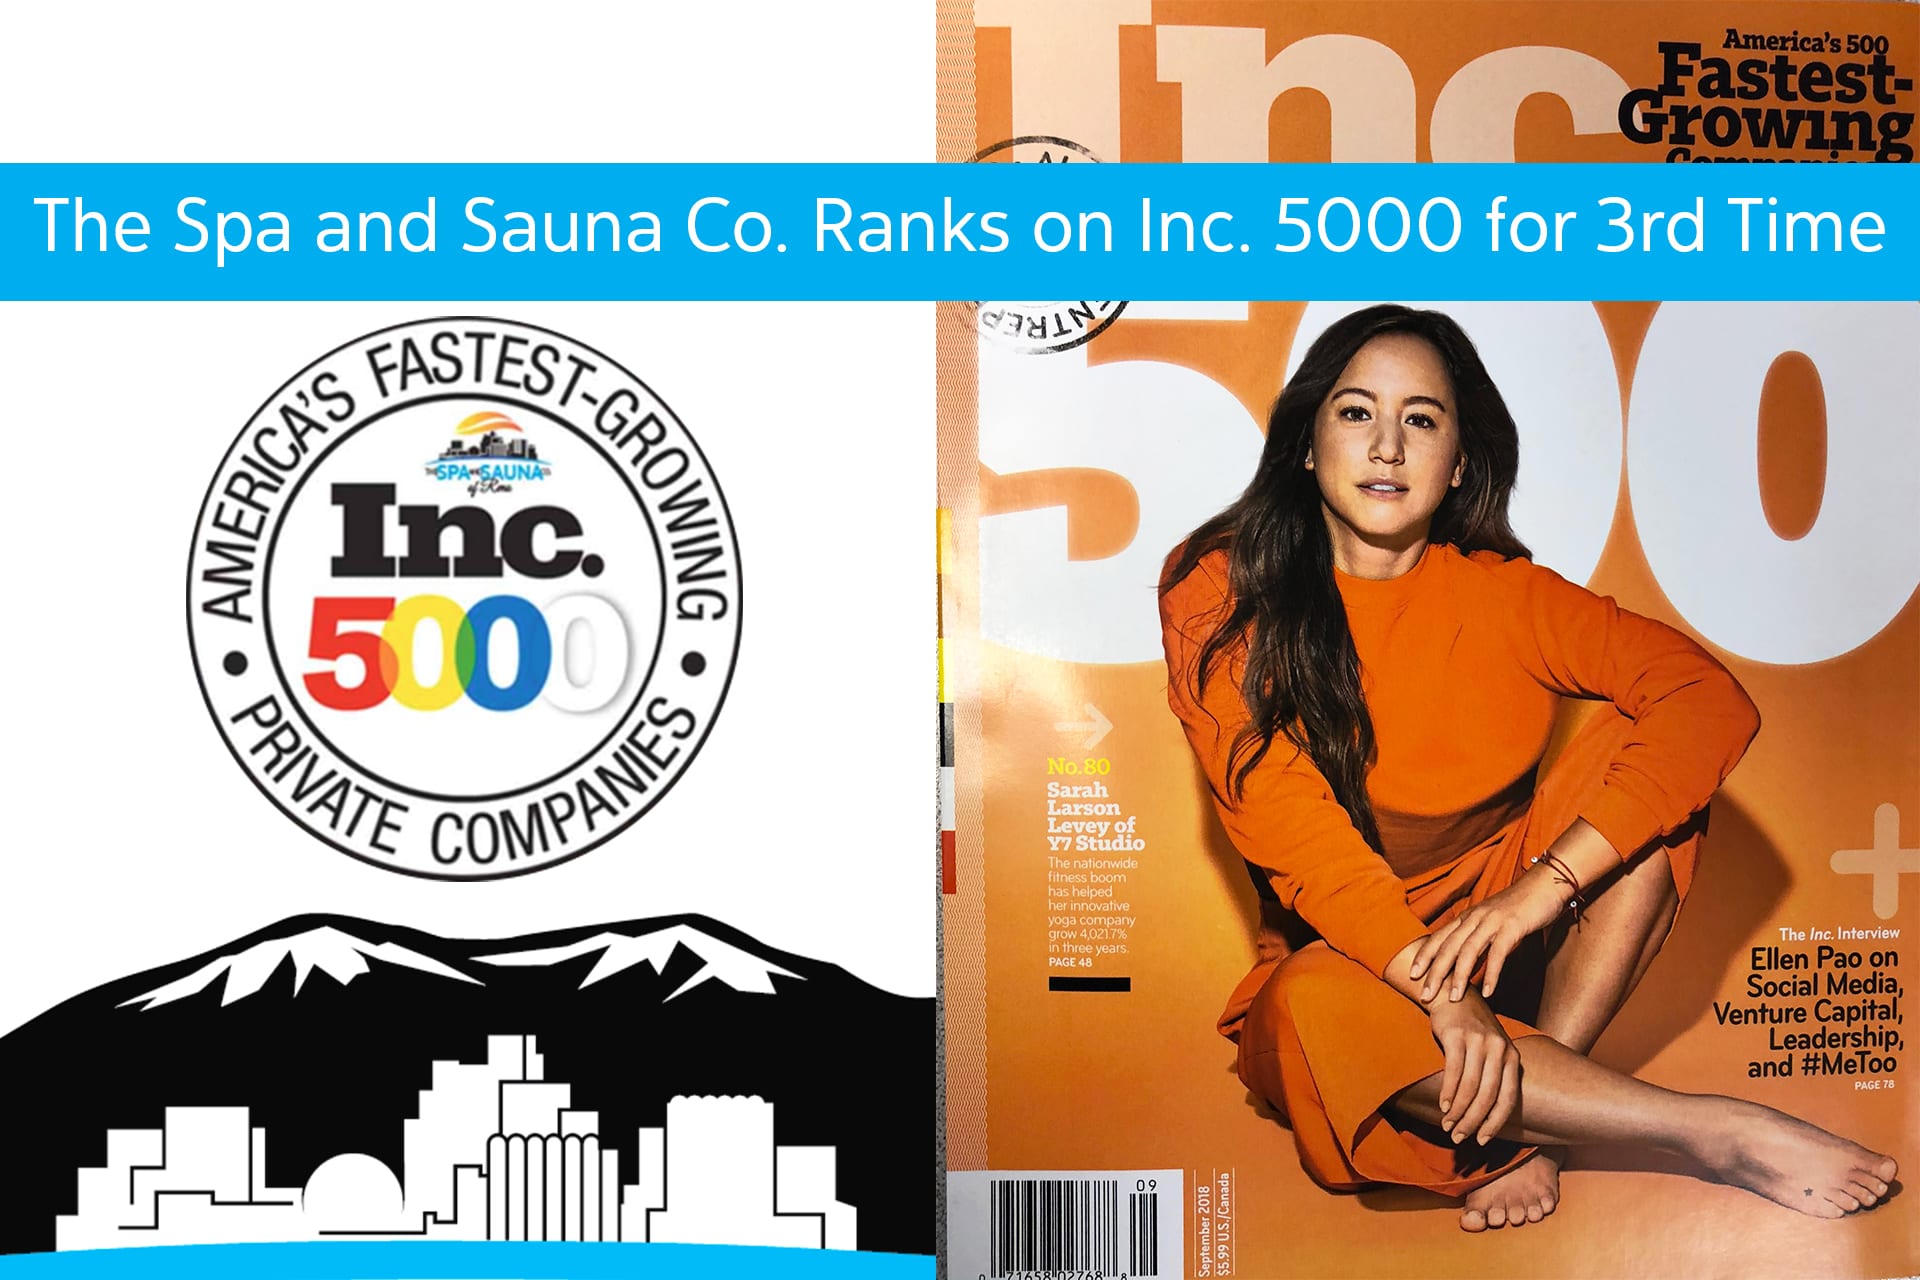 For Third Year in a Row, The Spa & Sauna Company Ranks on the 2018 Inc. 5000 List!